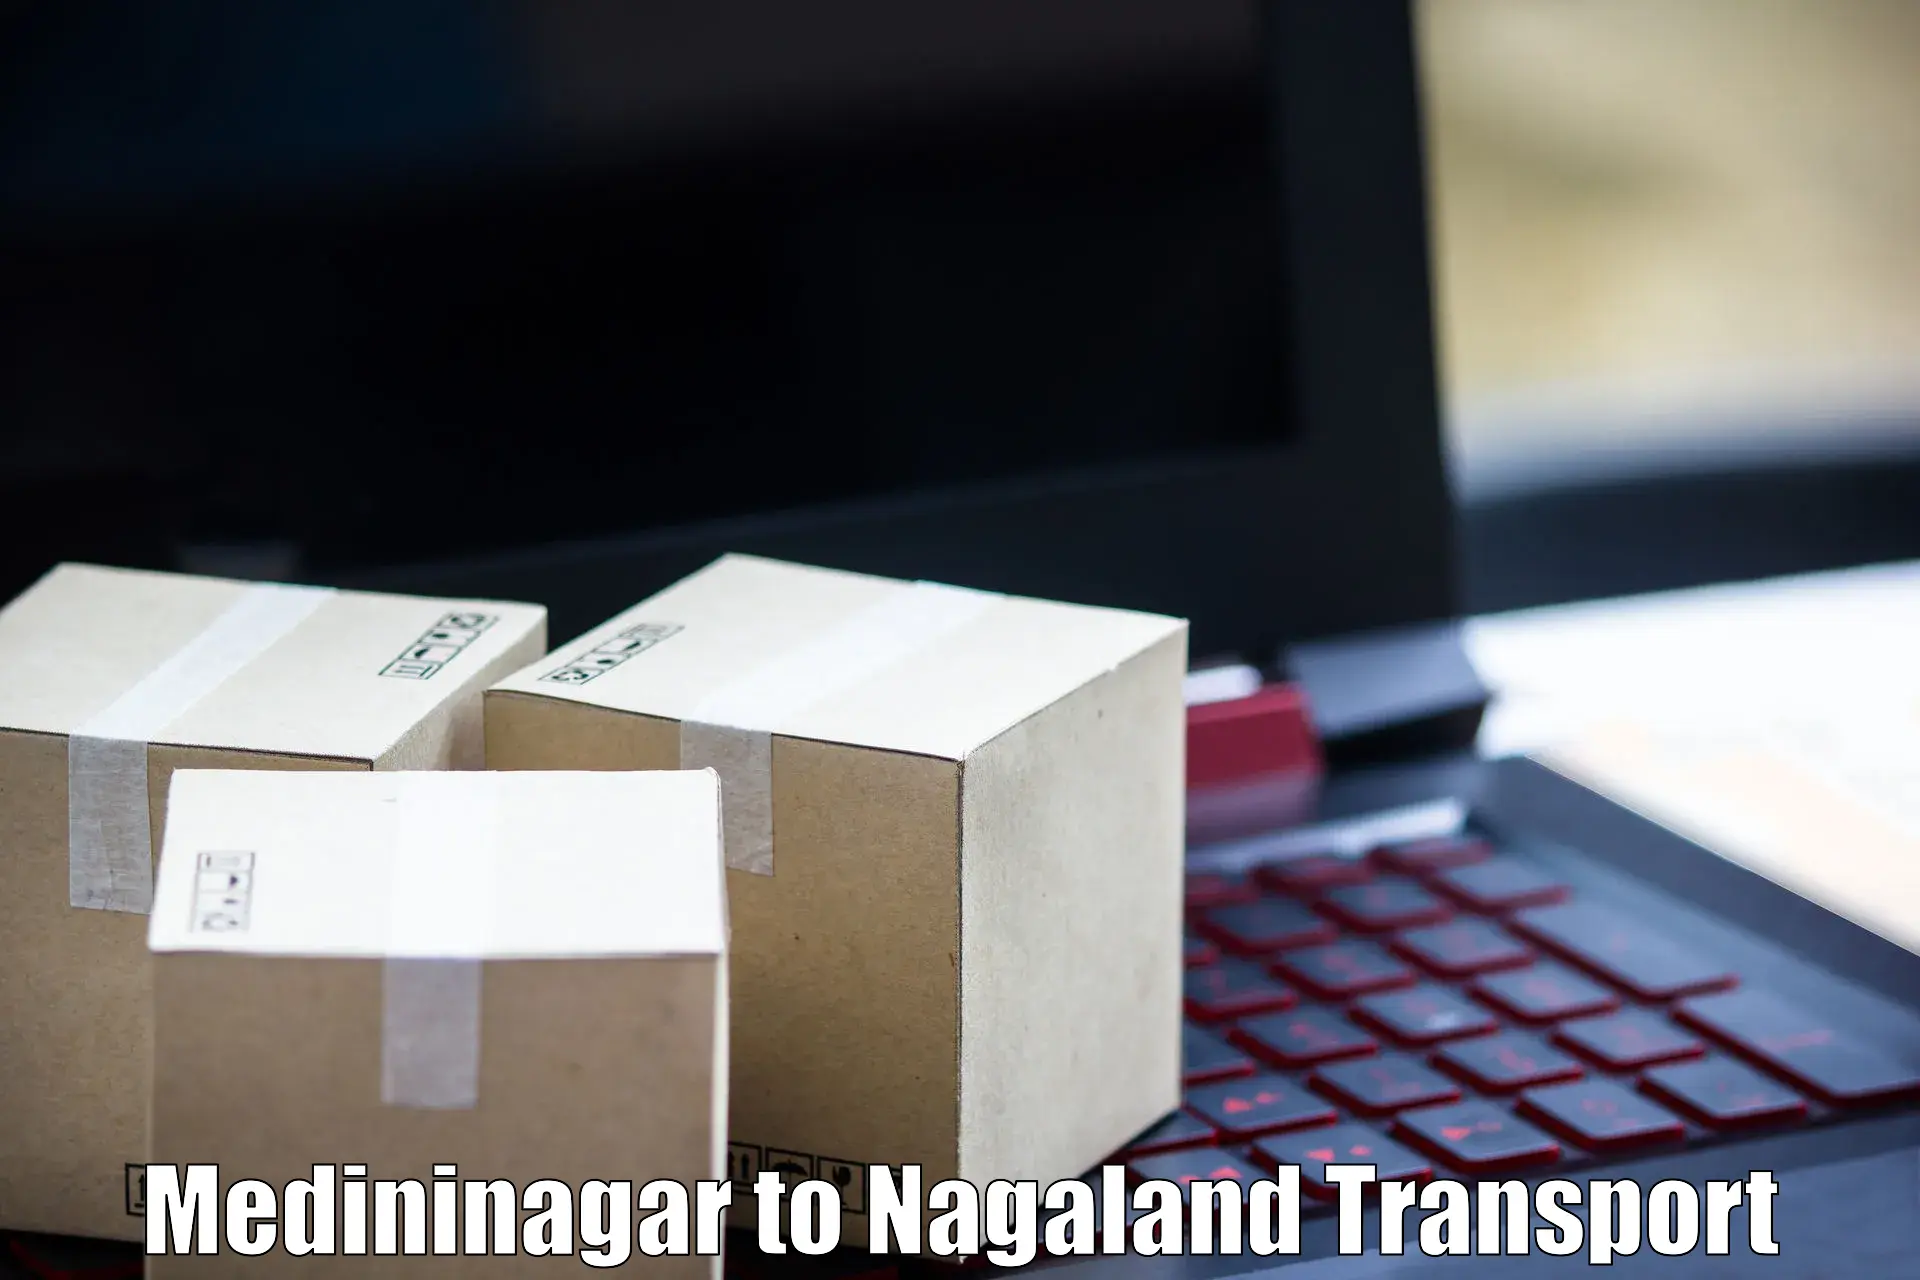 Package delivery services Medininagar to Nagaland